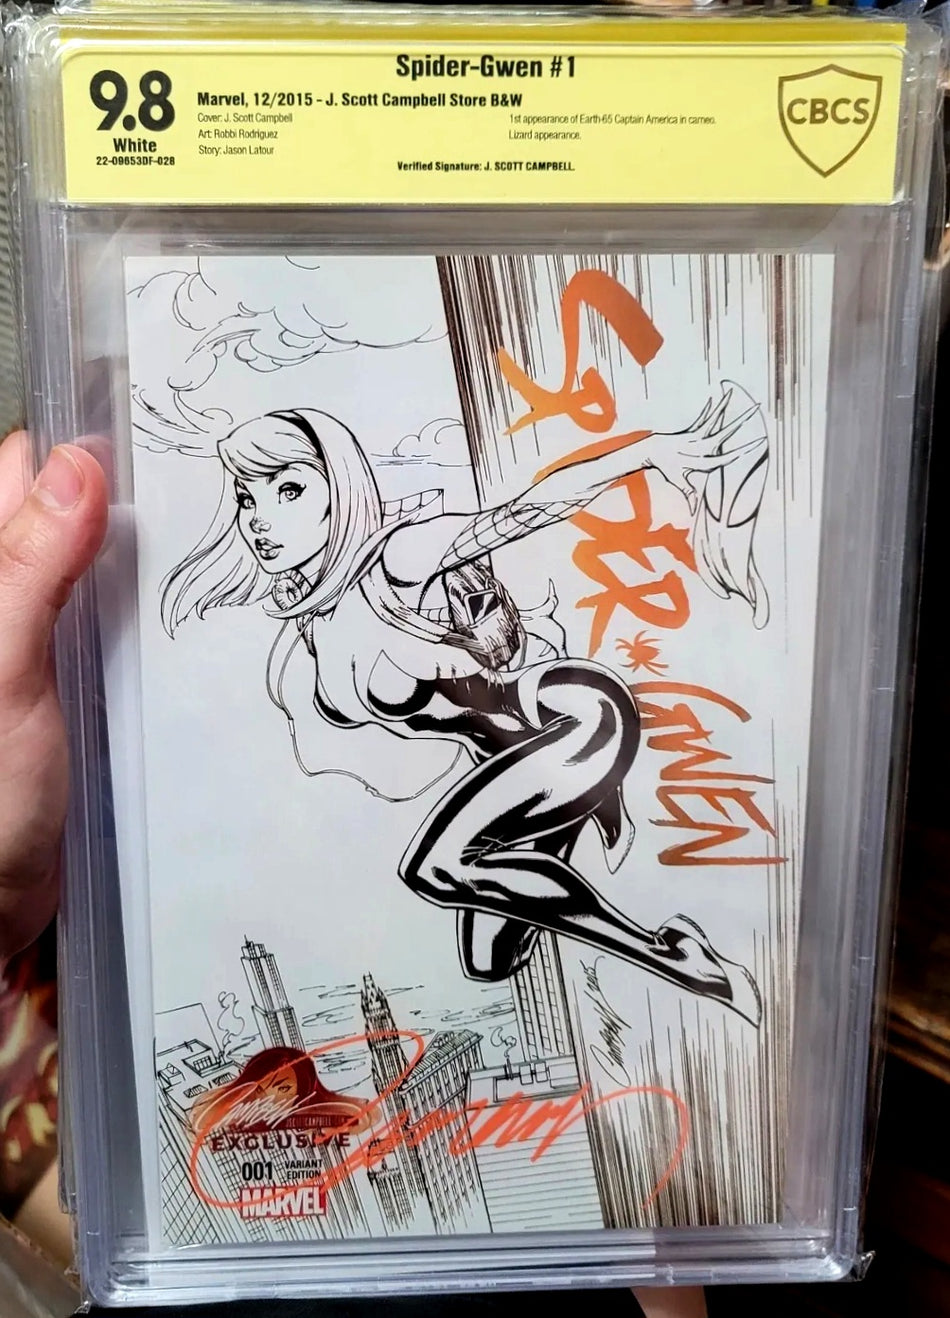 Spider-Gwen #1 (2015) JSC J Scott Campbell B&W Exclusive CBCS 9.8 VERIFIED SIGNATURE by Campbell w/ COA (1st Appearance of Earth-65 Captain America in Cameo)